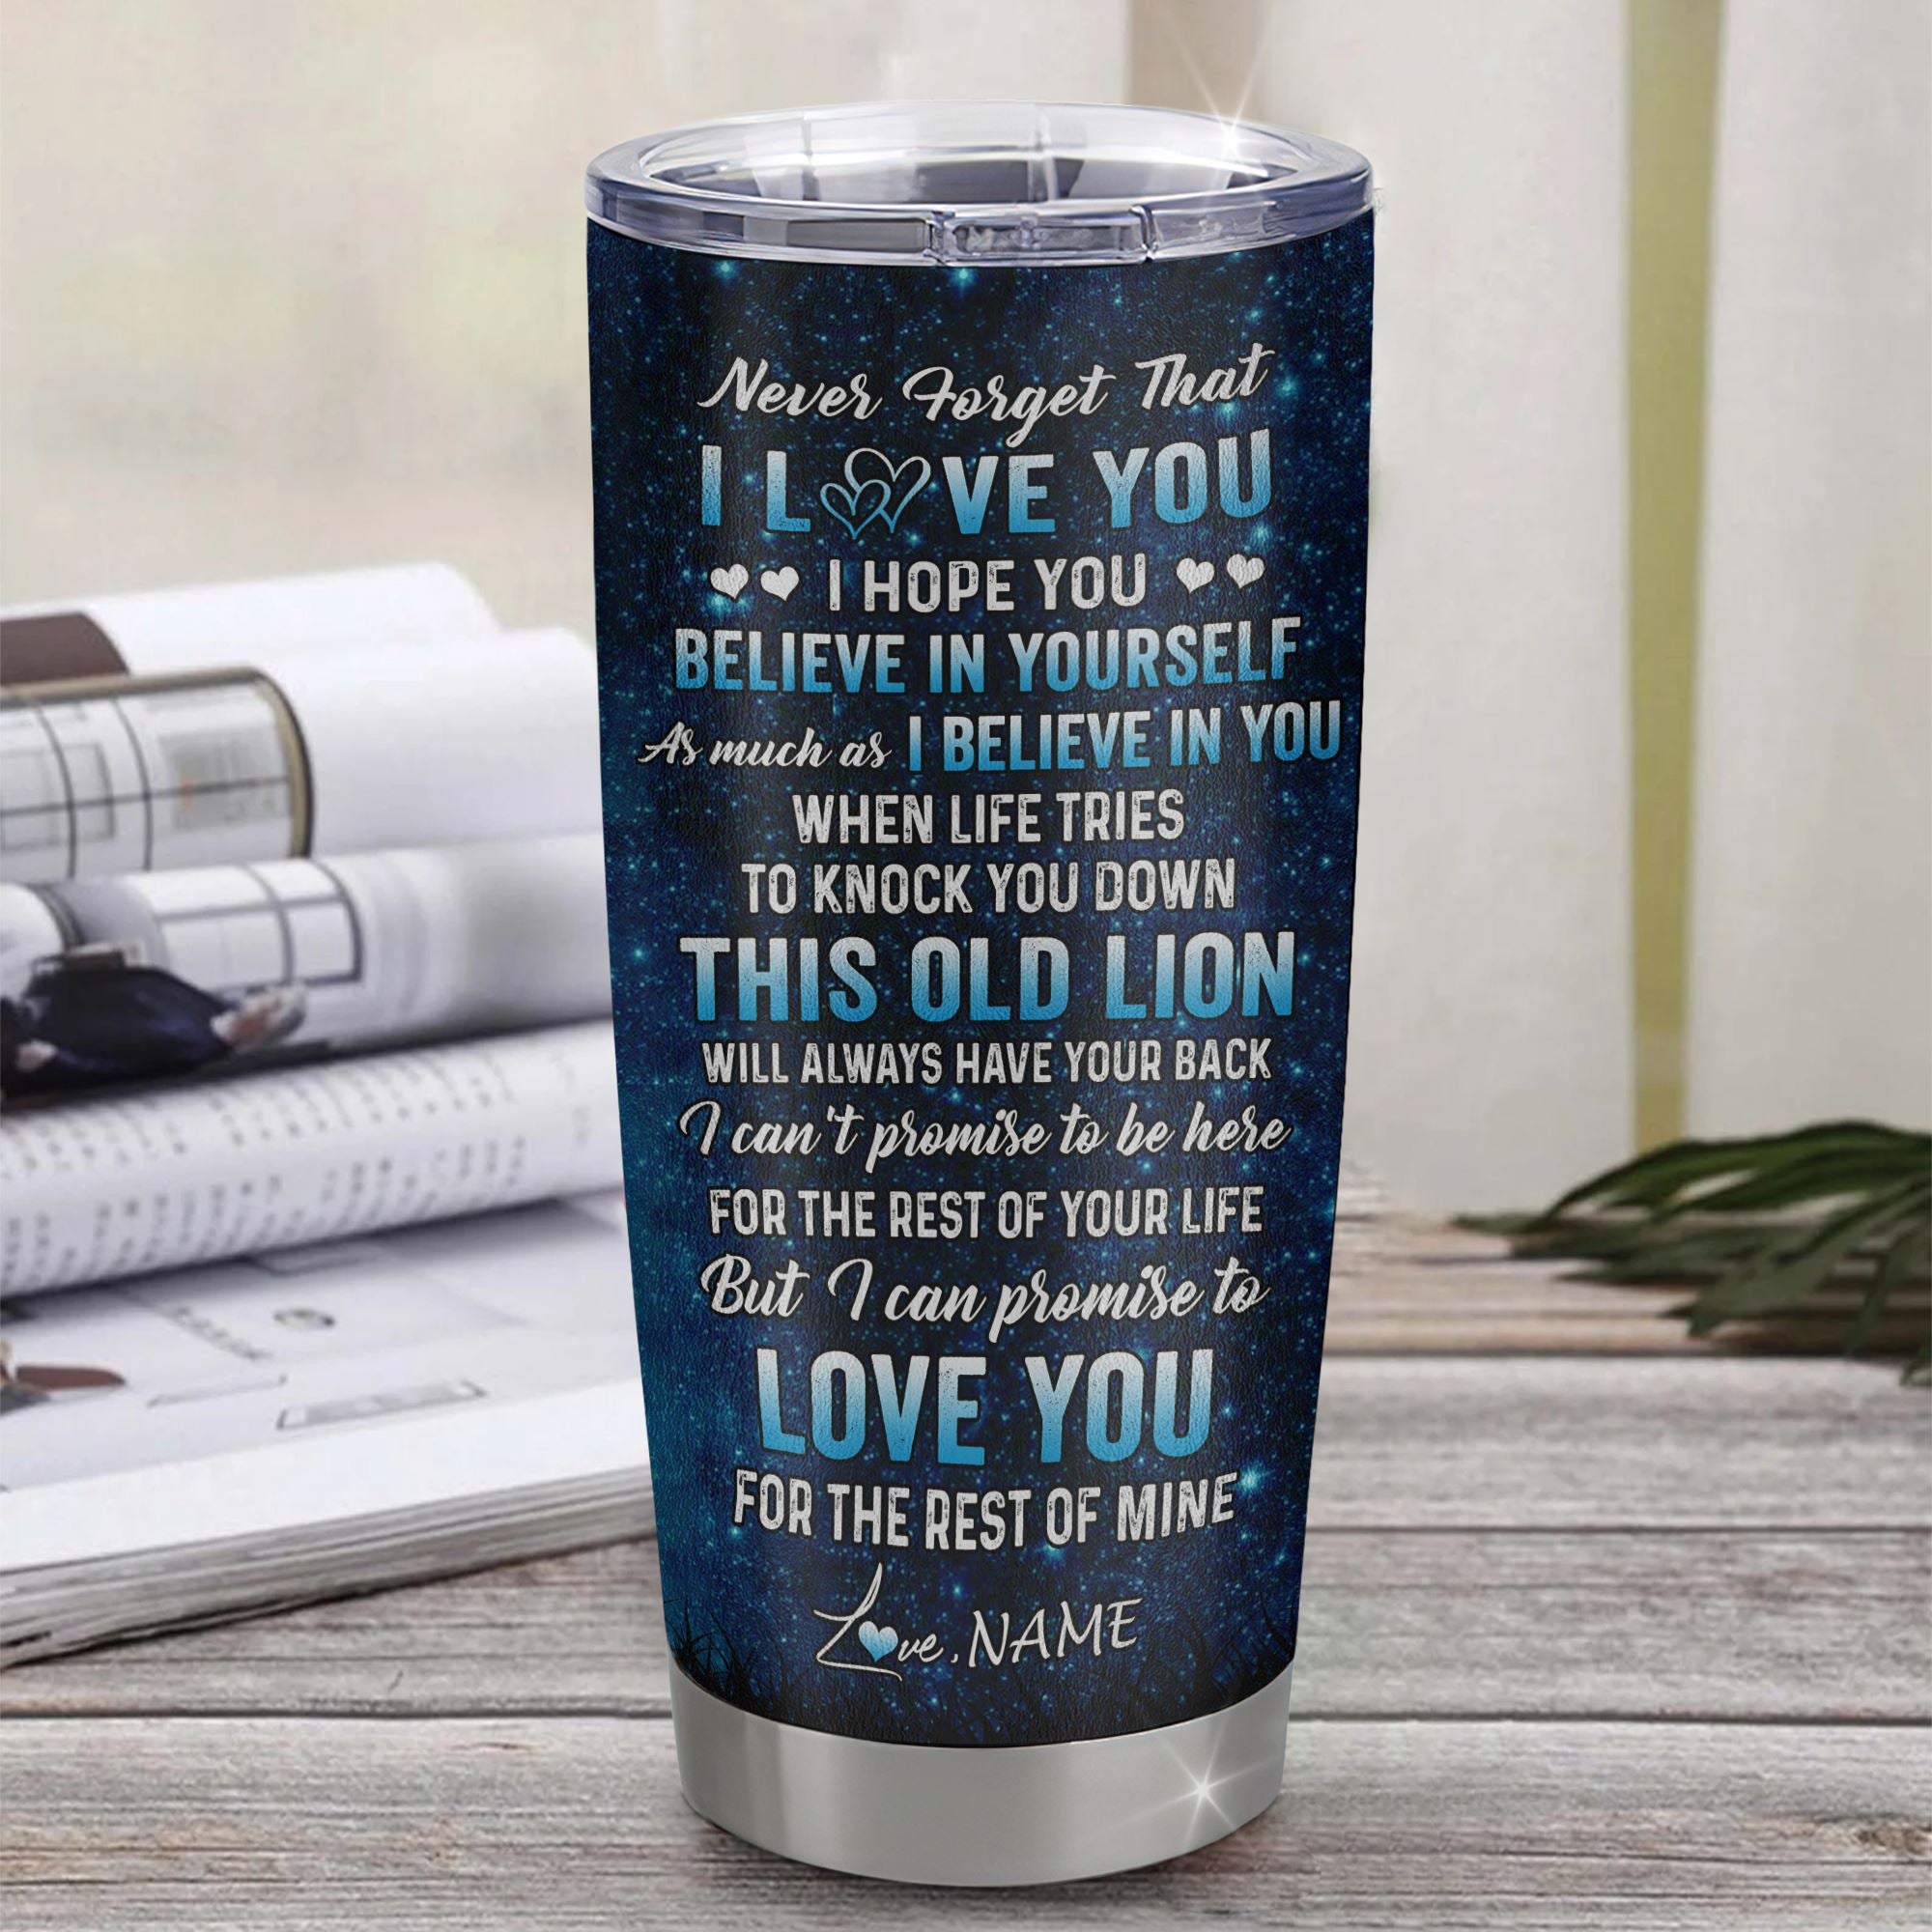 Personalized_To_My_Granddaughter_Tumbler_From_Grandma_Gigi_Stainless_Steel_Cup_This_Old_Lion_Love_You_Granddaughter_Birthday_Graduation_Christmas_Travel_Mug_Tumbler_mockup_1.jpg